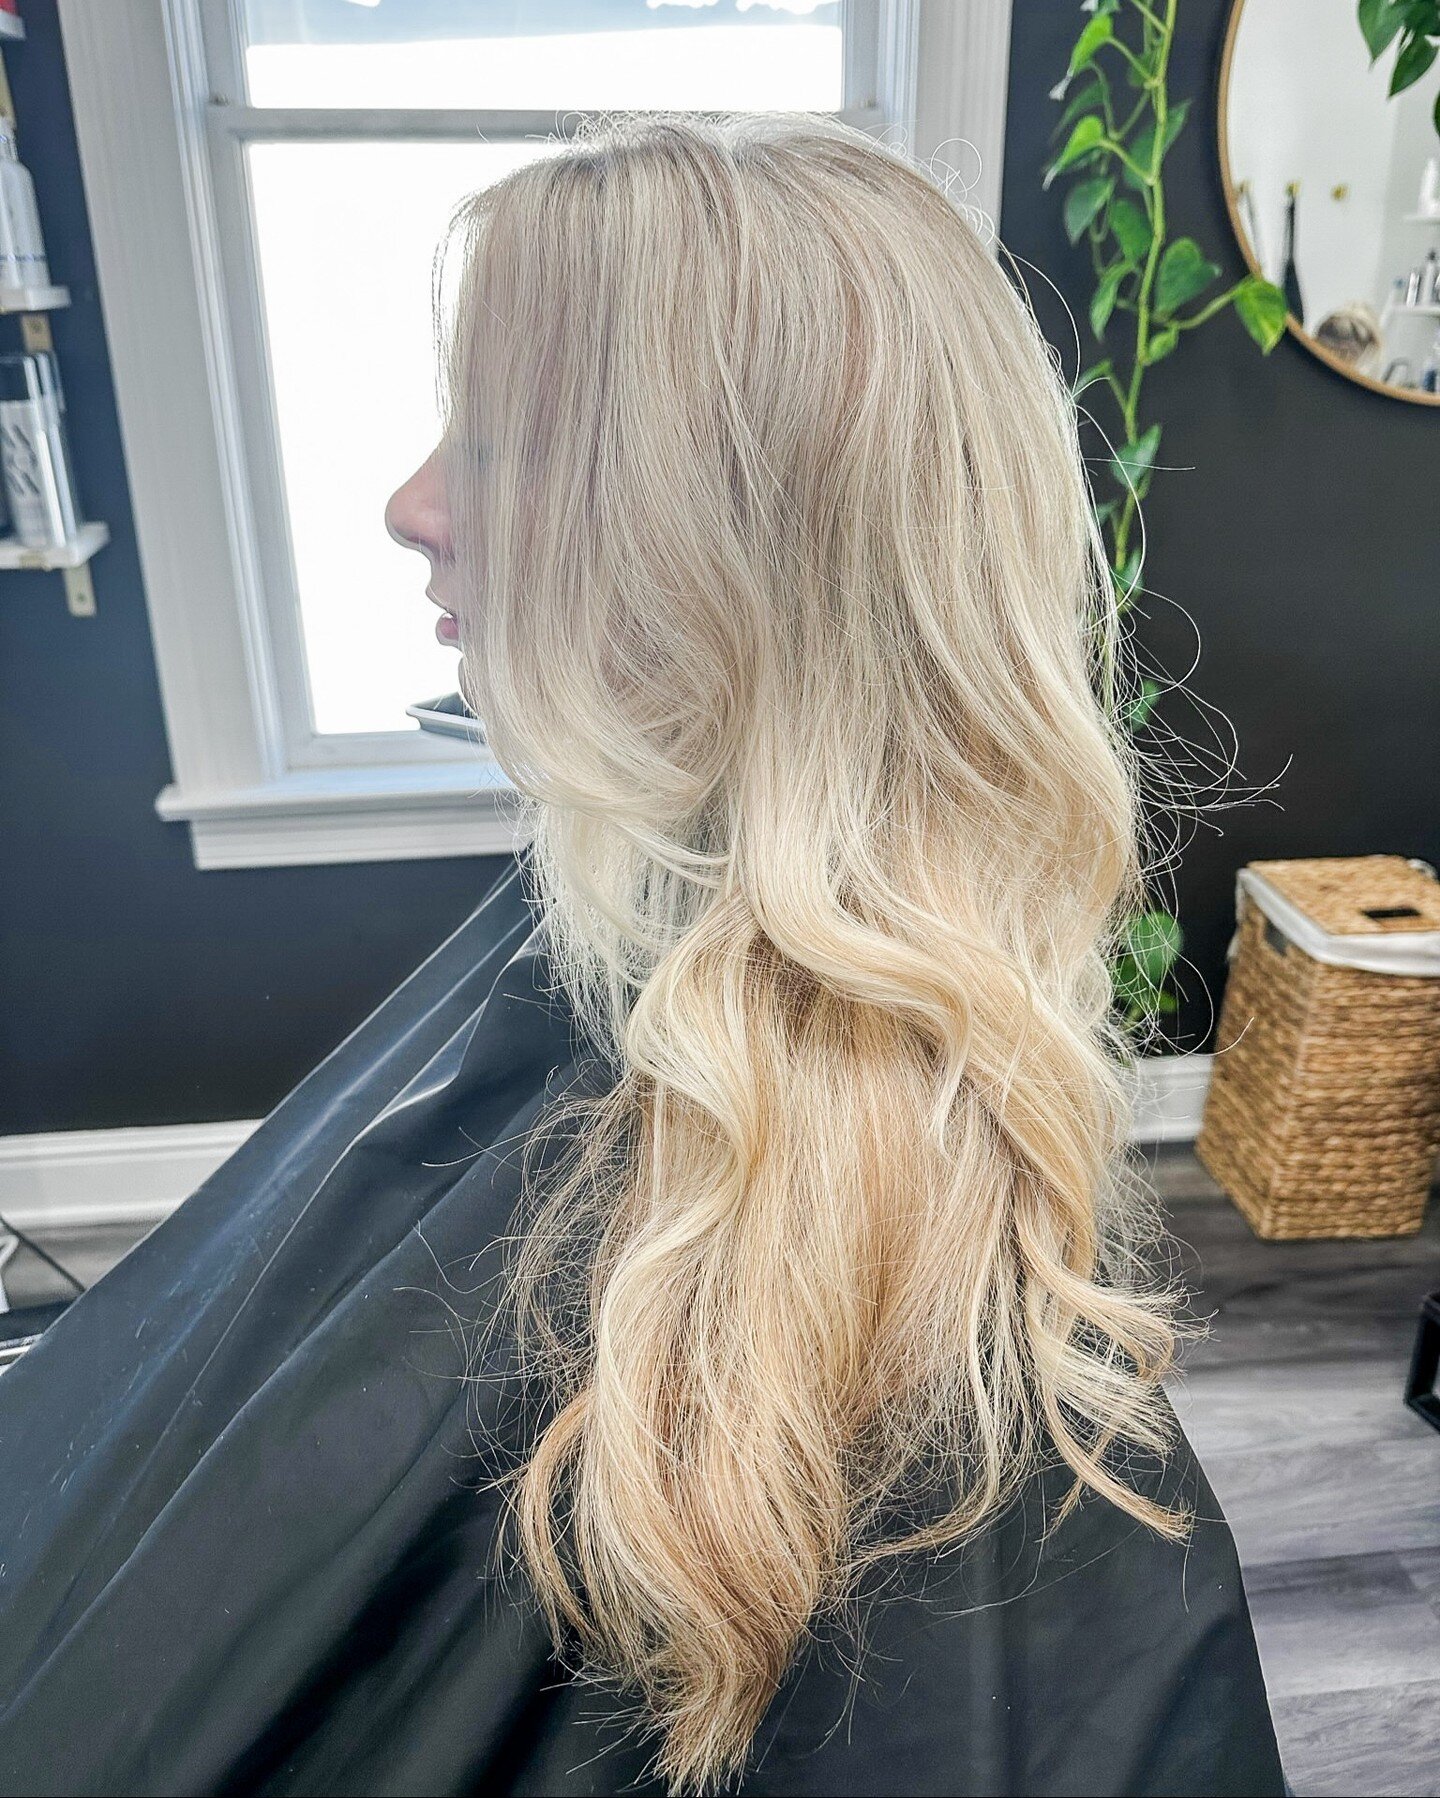 Give it up for the talented @alanamoodyhair 💛⁣

Alana brought her client's hair back to a stunning, vibrant blonde!
⁣
Are you are ready to say goodbye to dullness and hello to radiance? Lets embrace your inner blonde bombshell!
⁣
DM us today to book